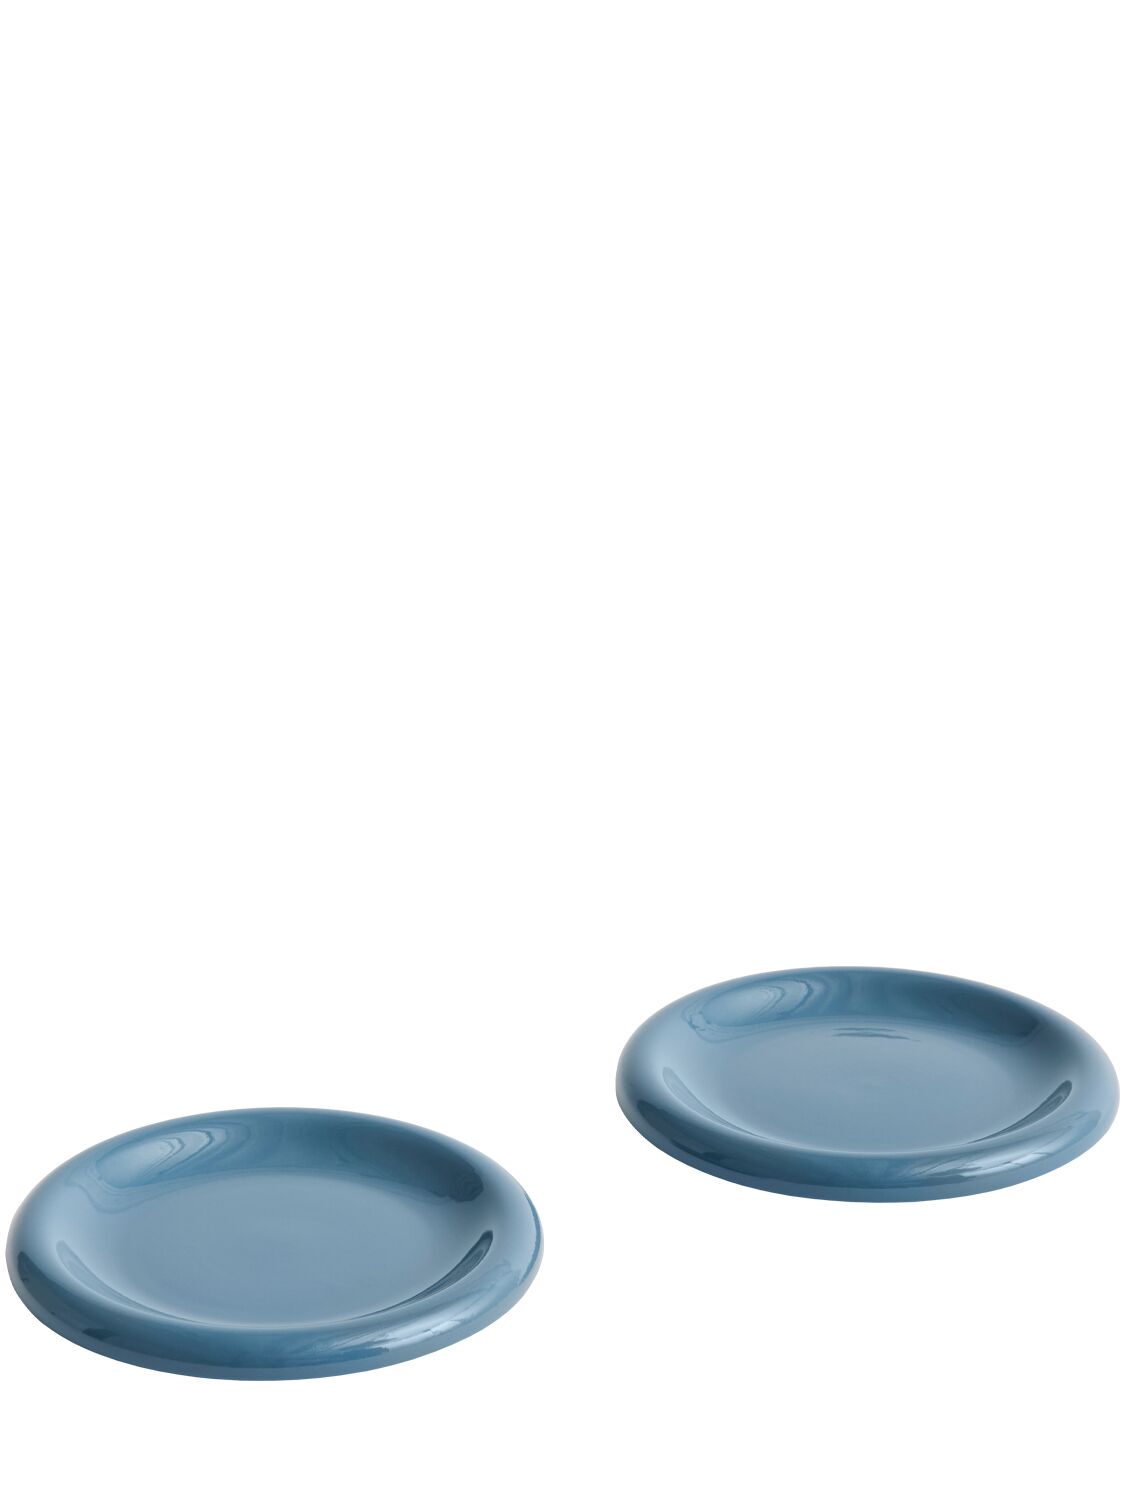 Hay Set Of 2 Barro Plates In Blue